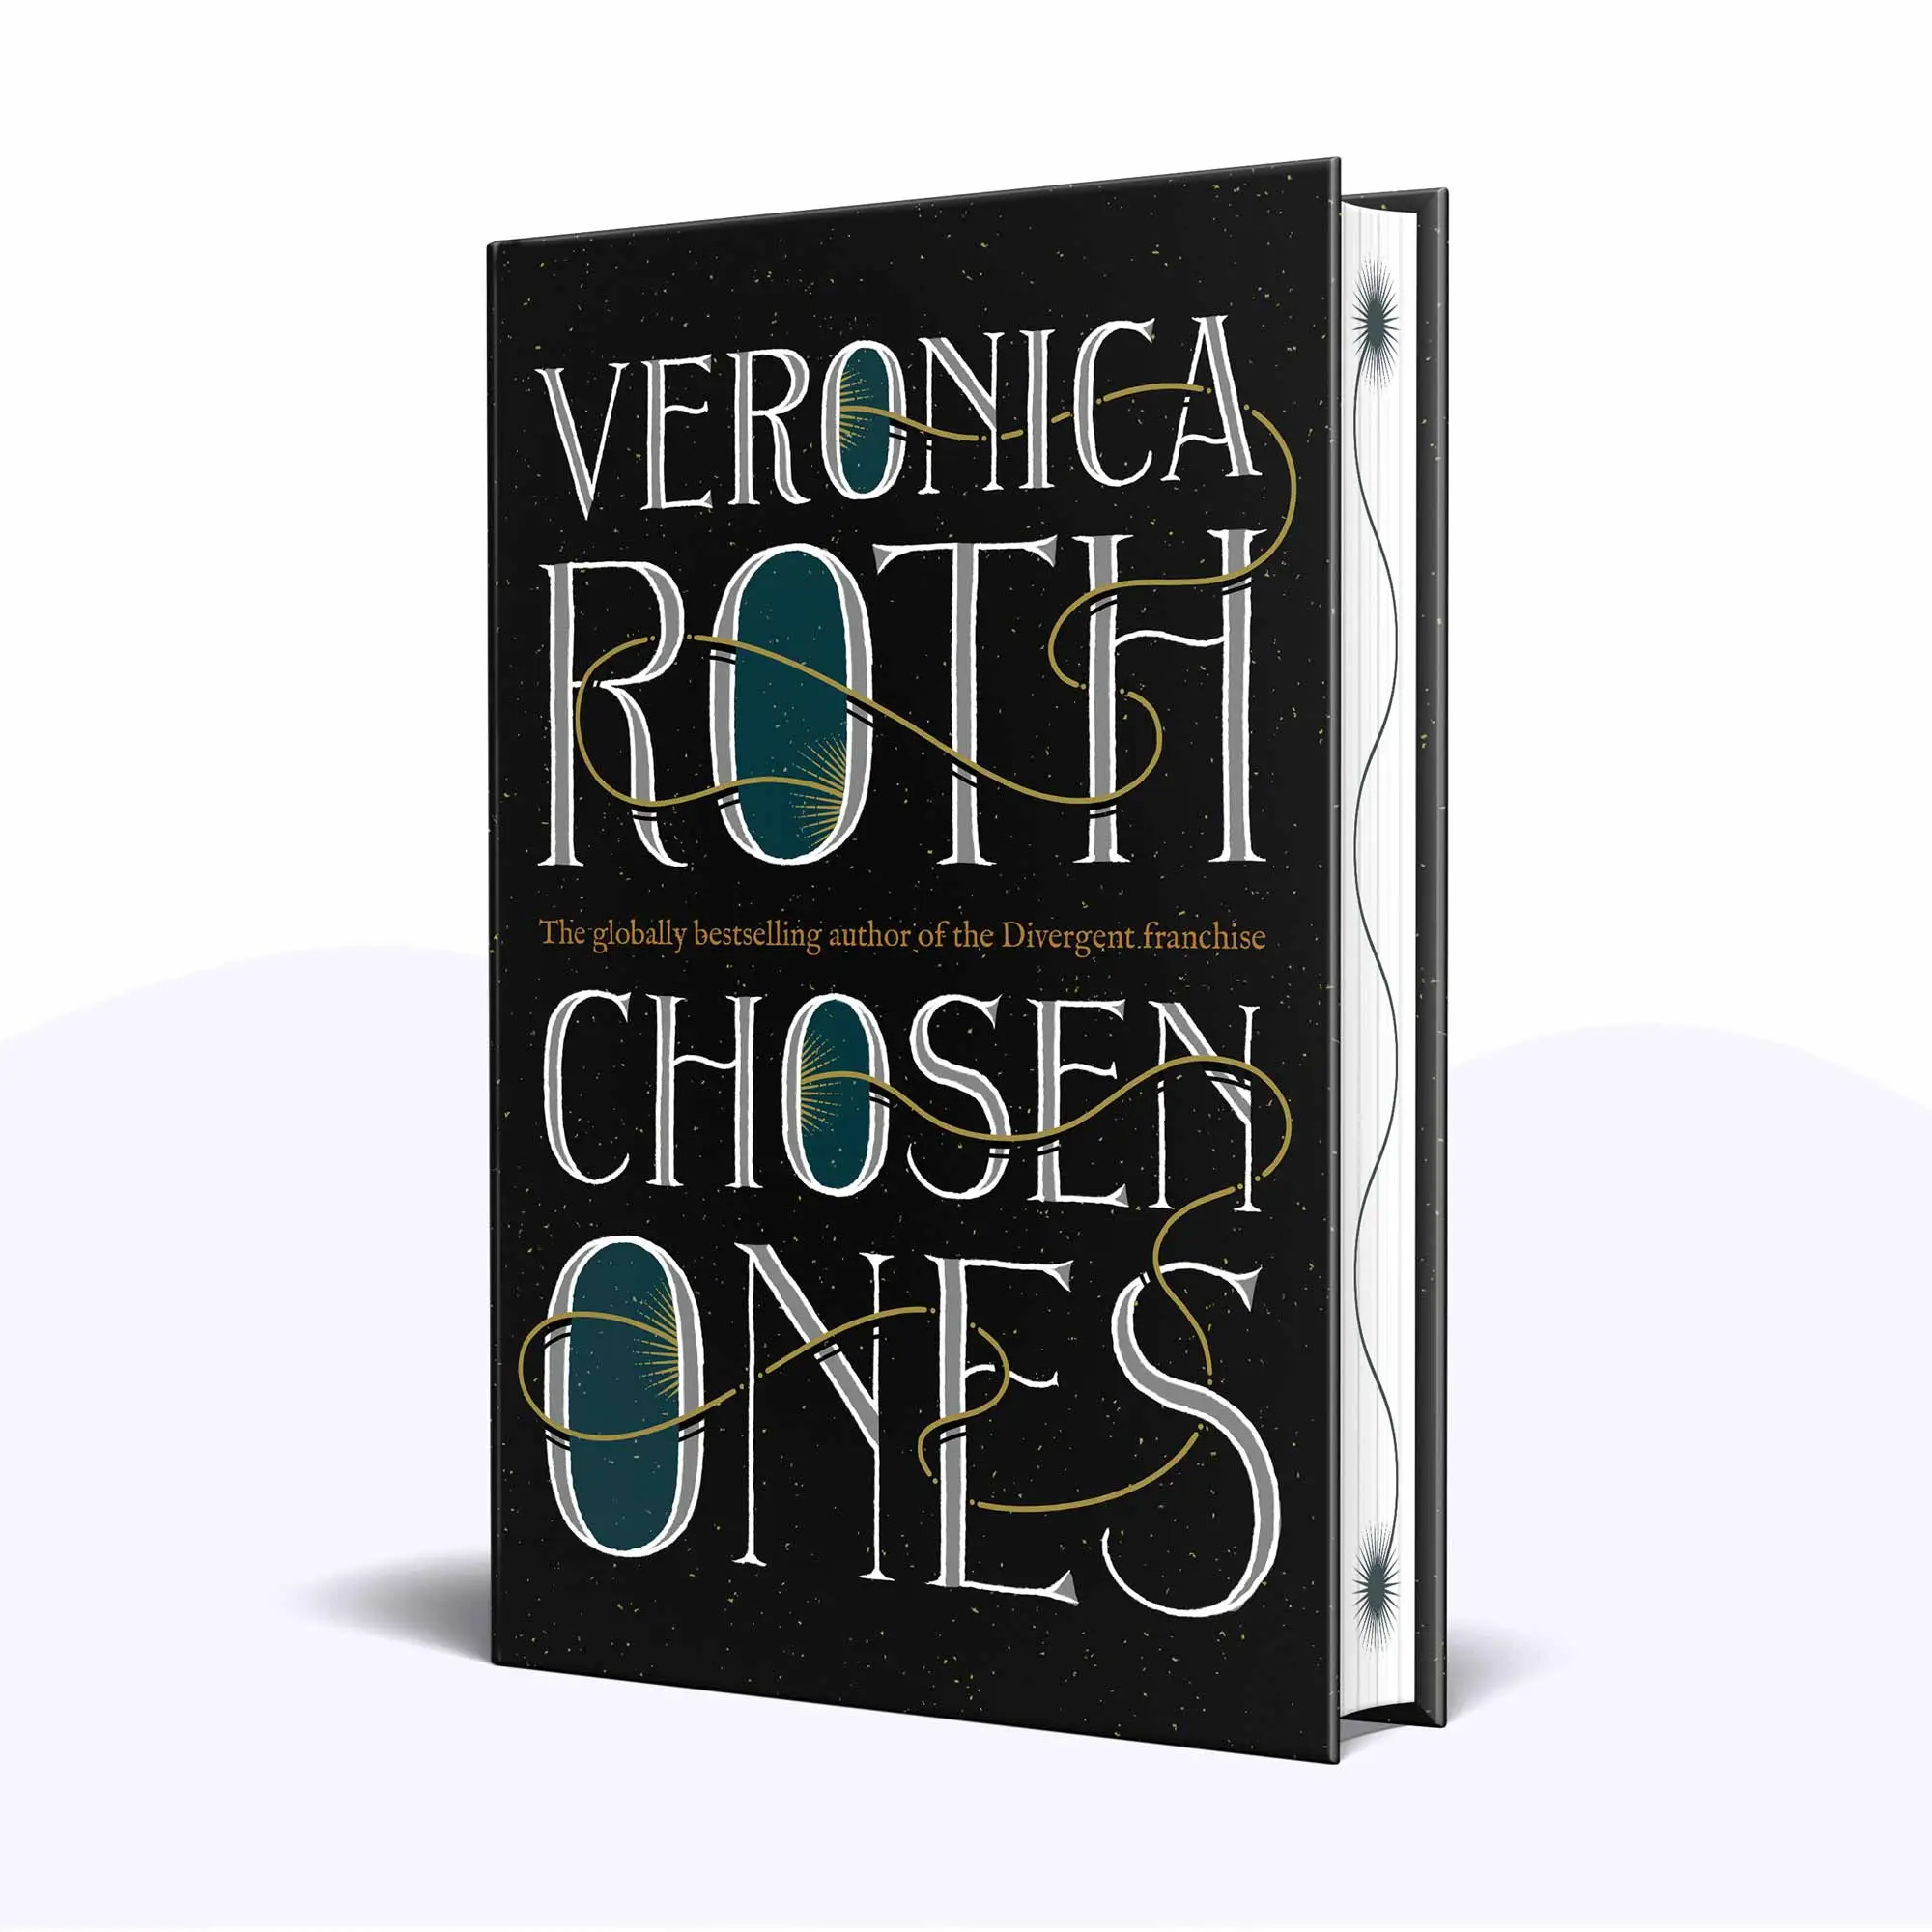 CHOSEN ONES by Veronica Roth